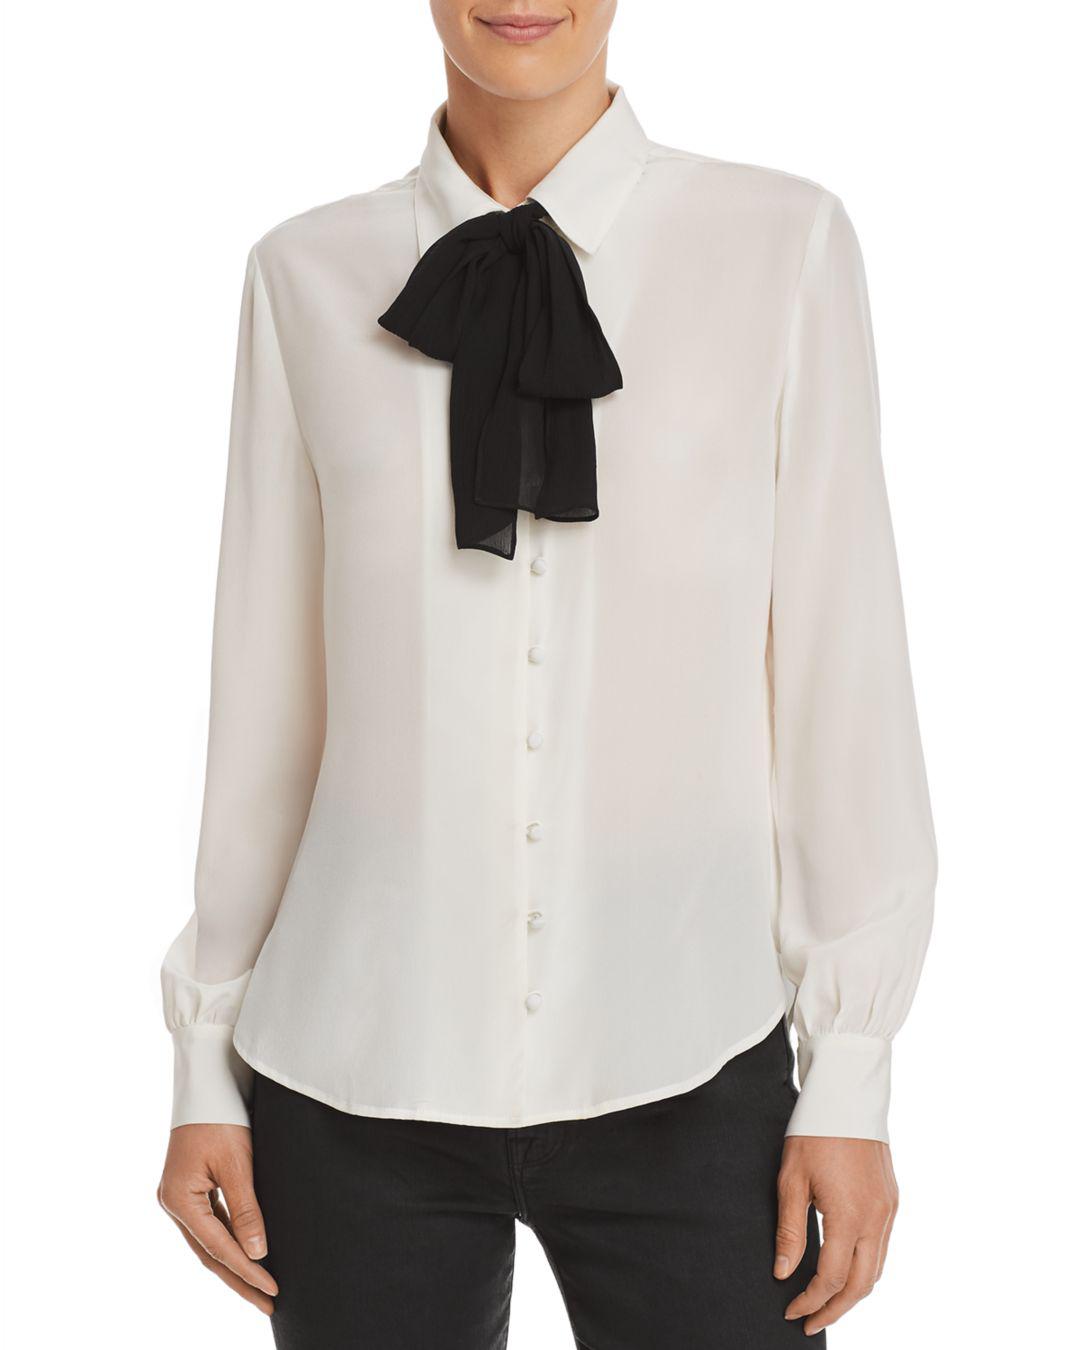 FRAME Bow Tie Blouse in White | Lyst